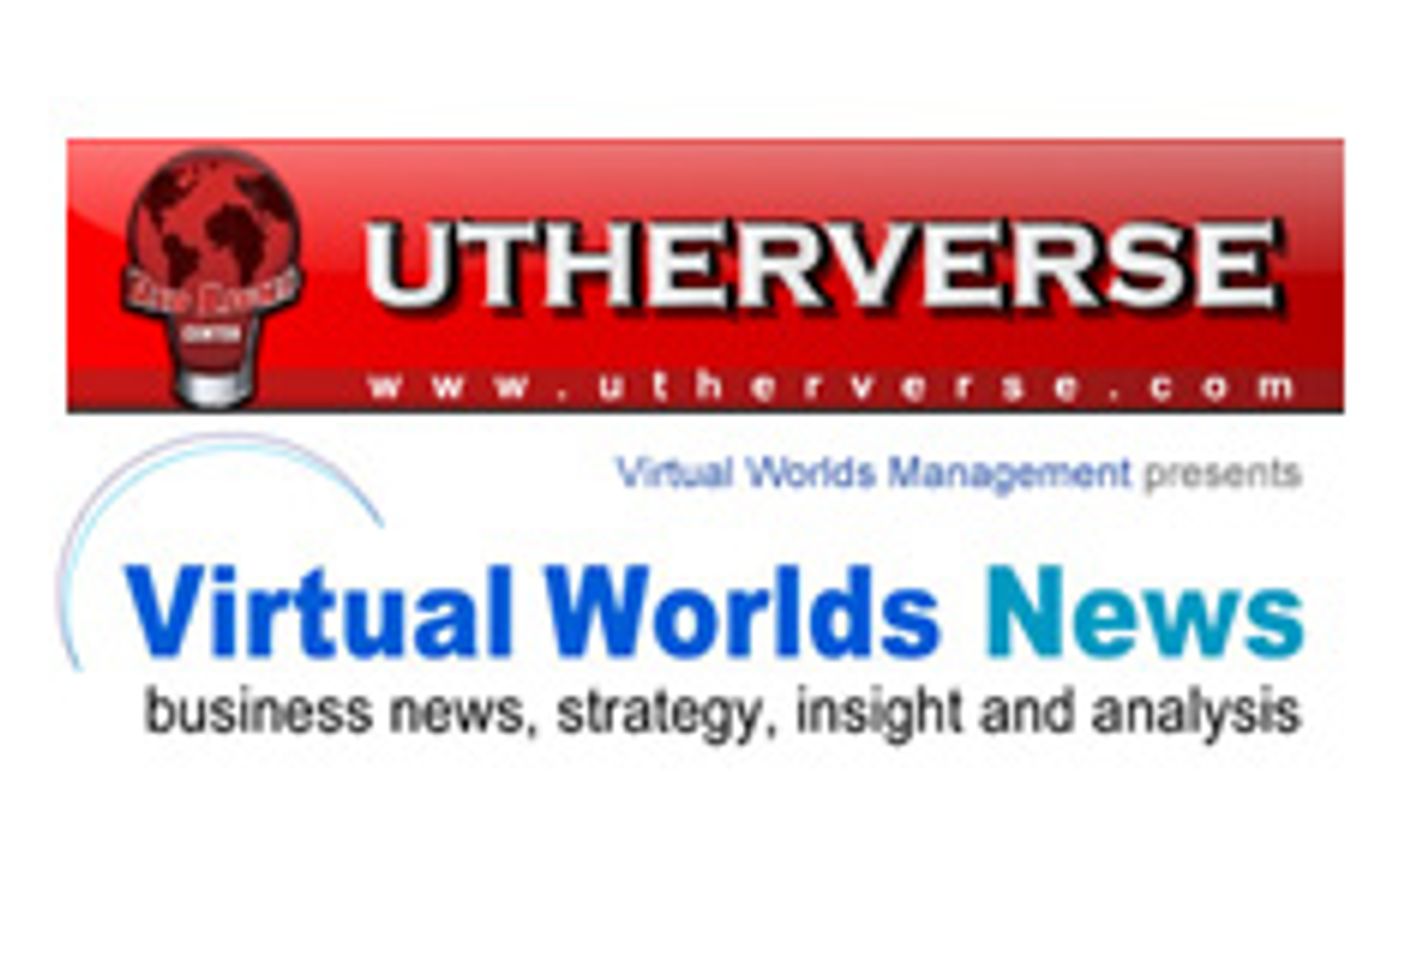 Virtual Worlds Conference Bans Utherverse From Panels